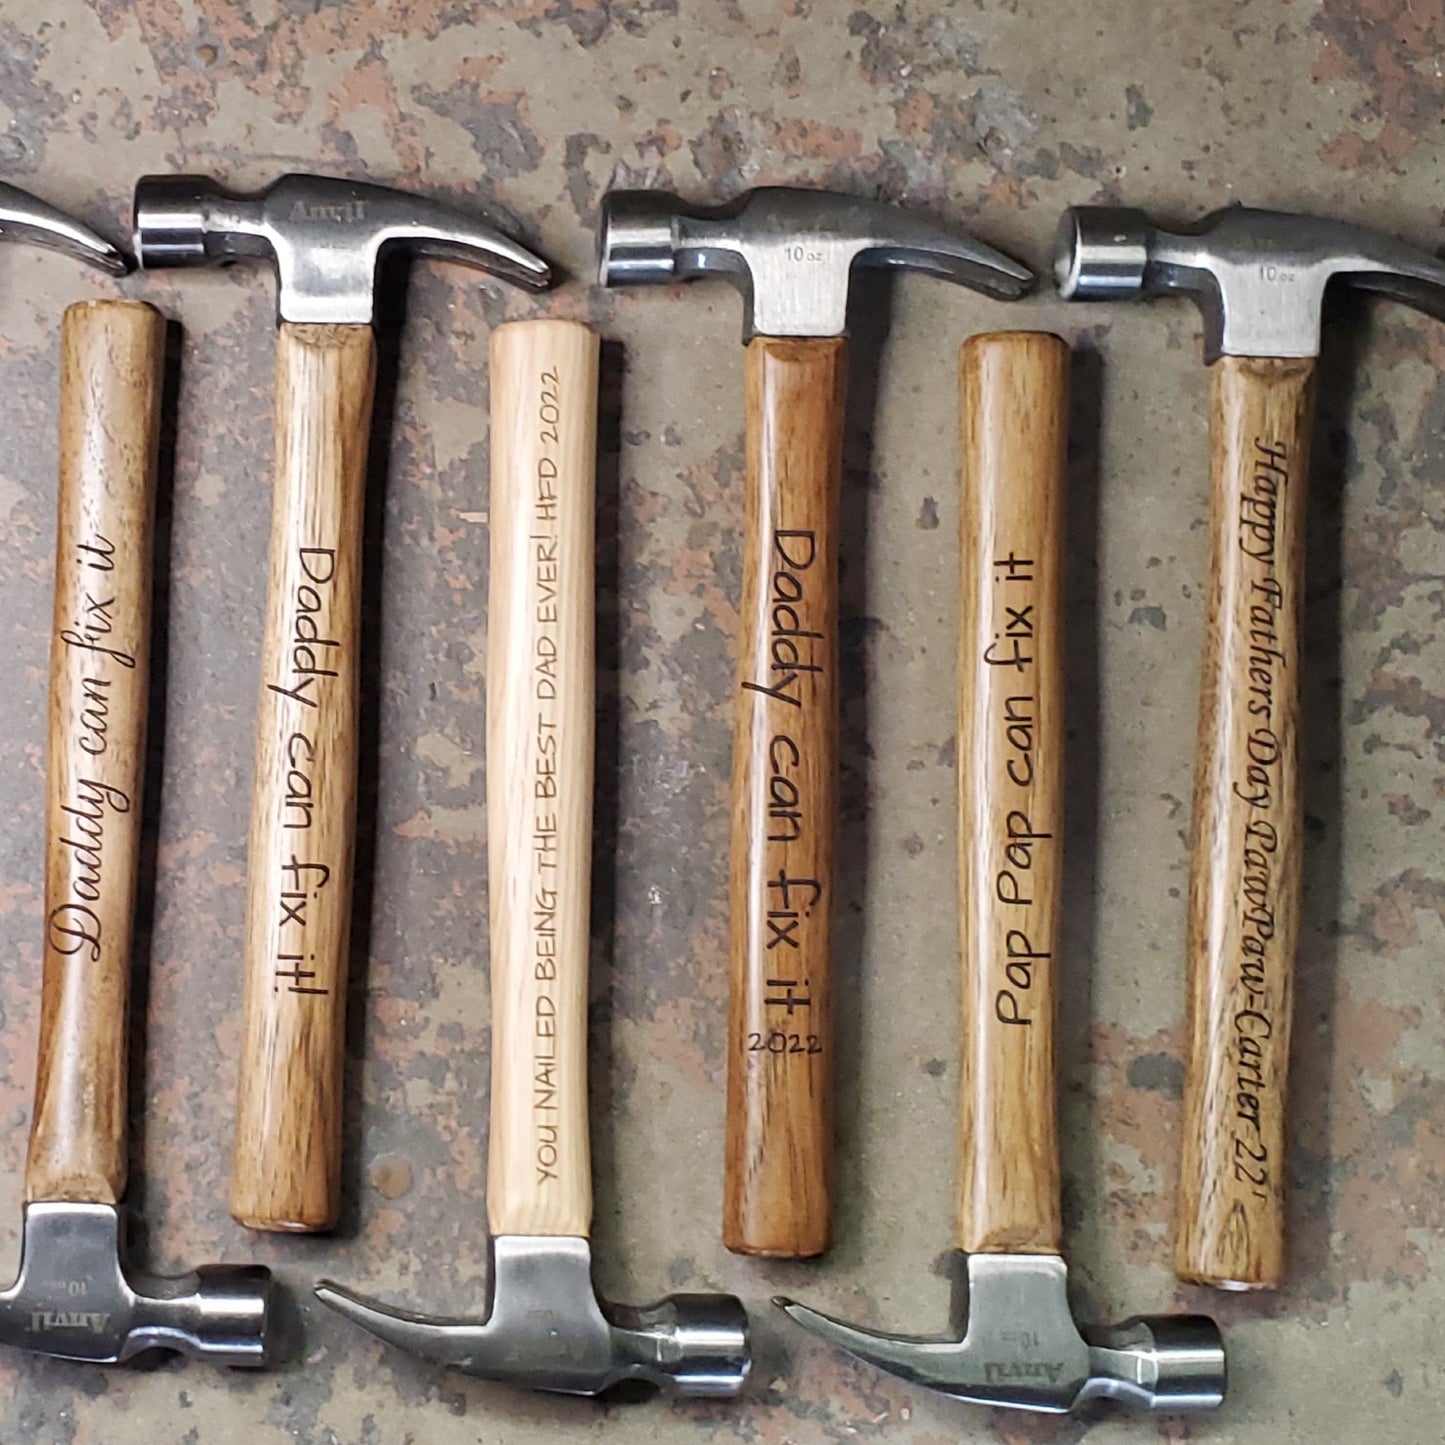 engraved hammer is the perfect gift for Dad's Birthday or Christmas